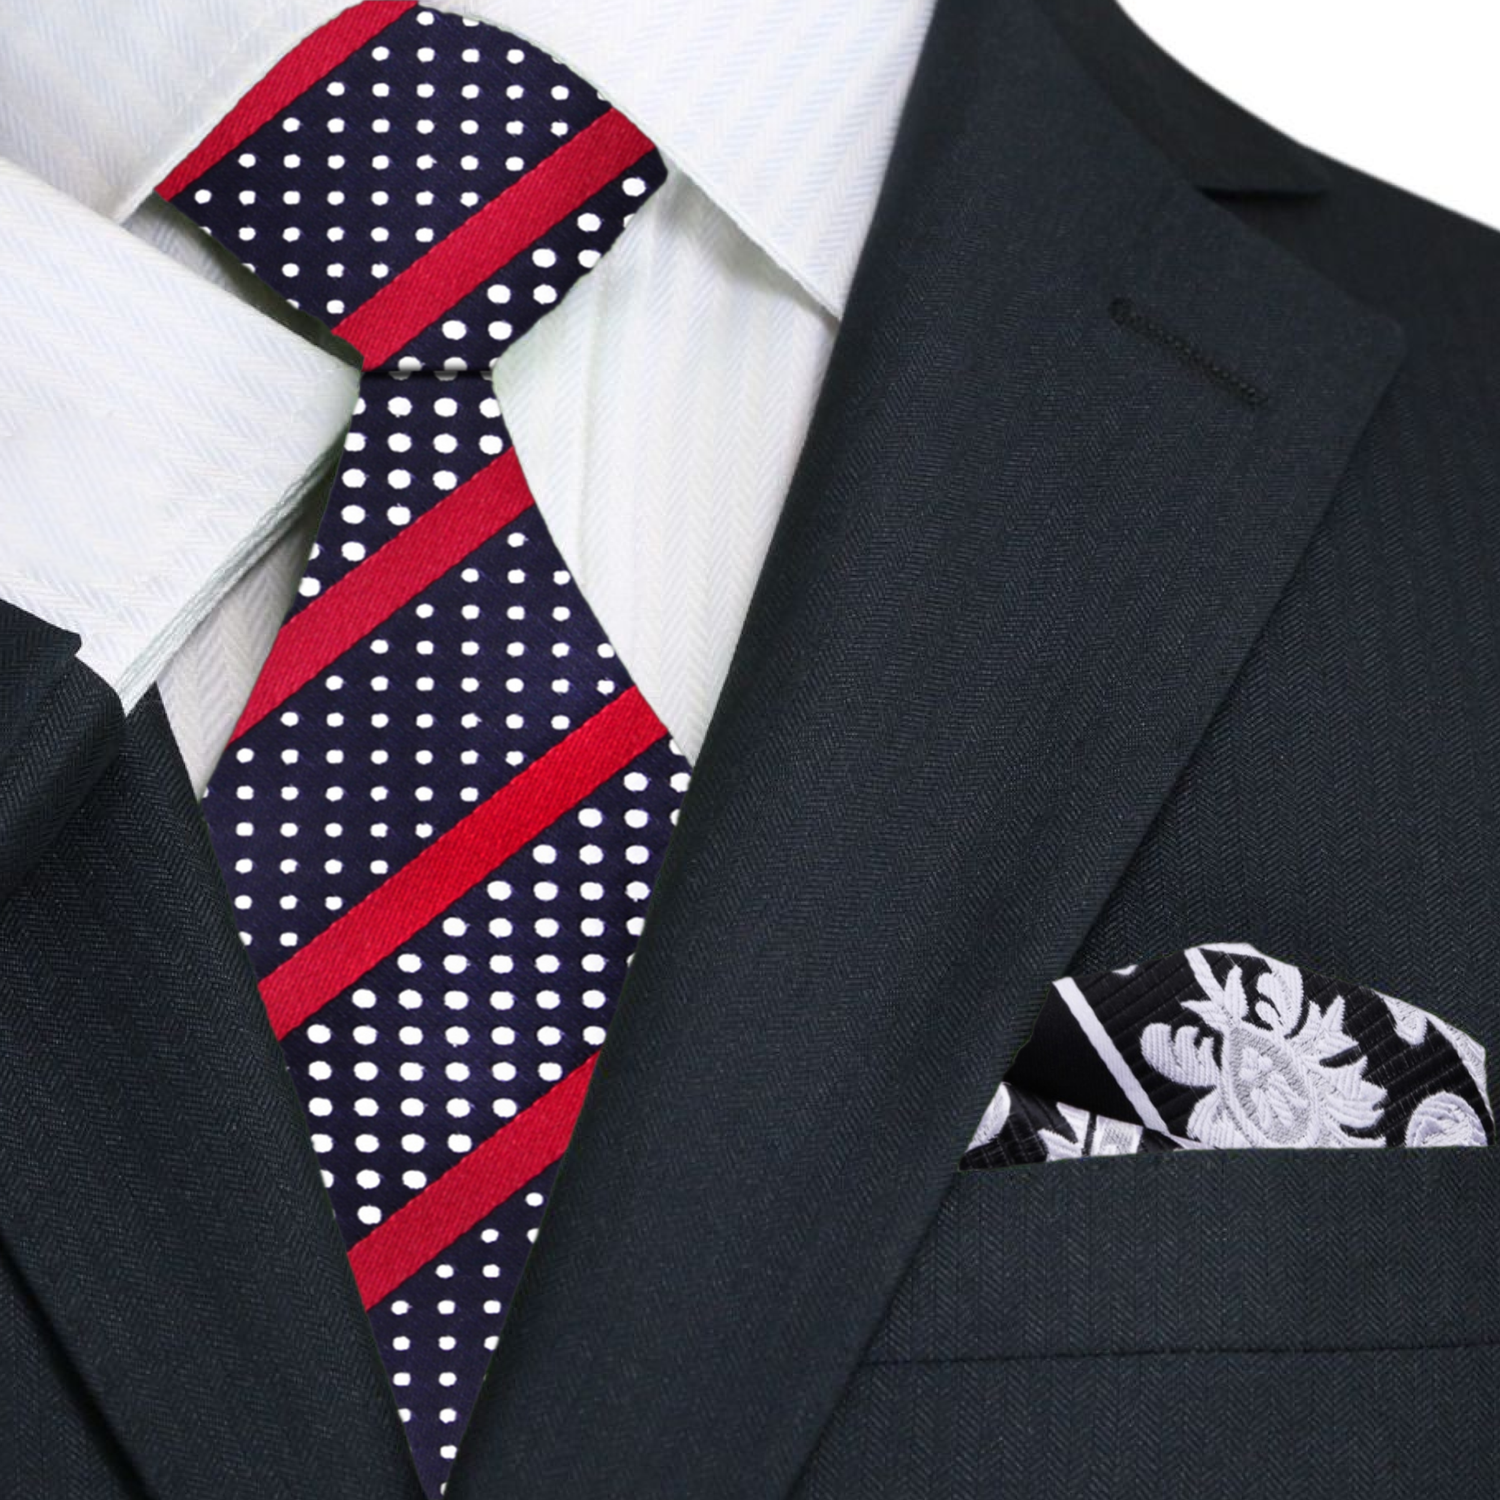 Black, Red, White with Stripes and Dots Tie with Accenting Black, Grey Paisley Square